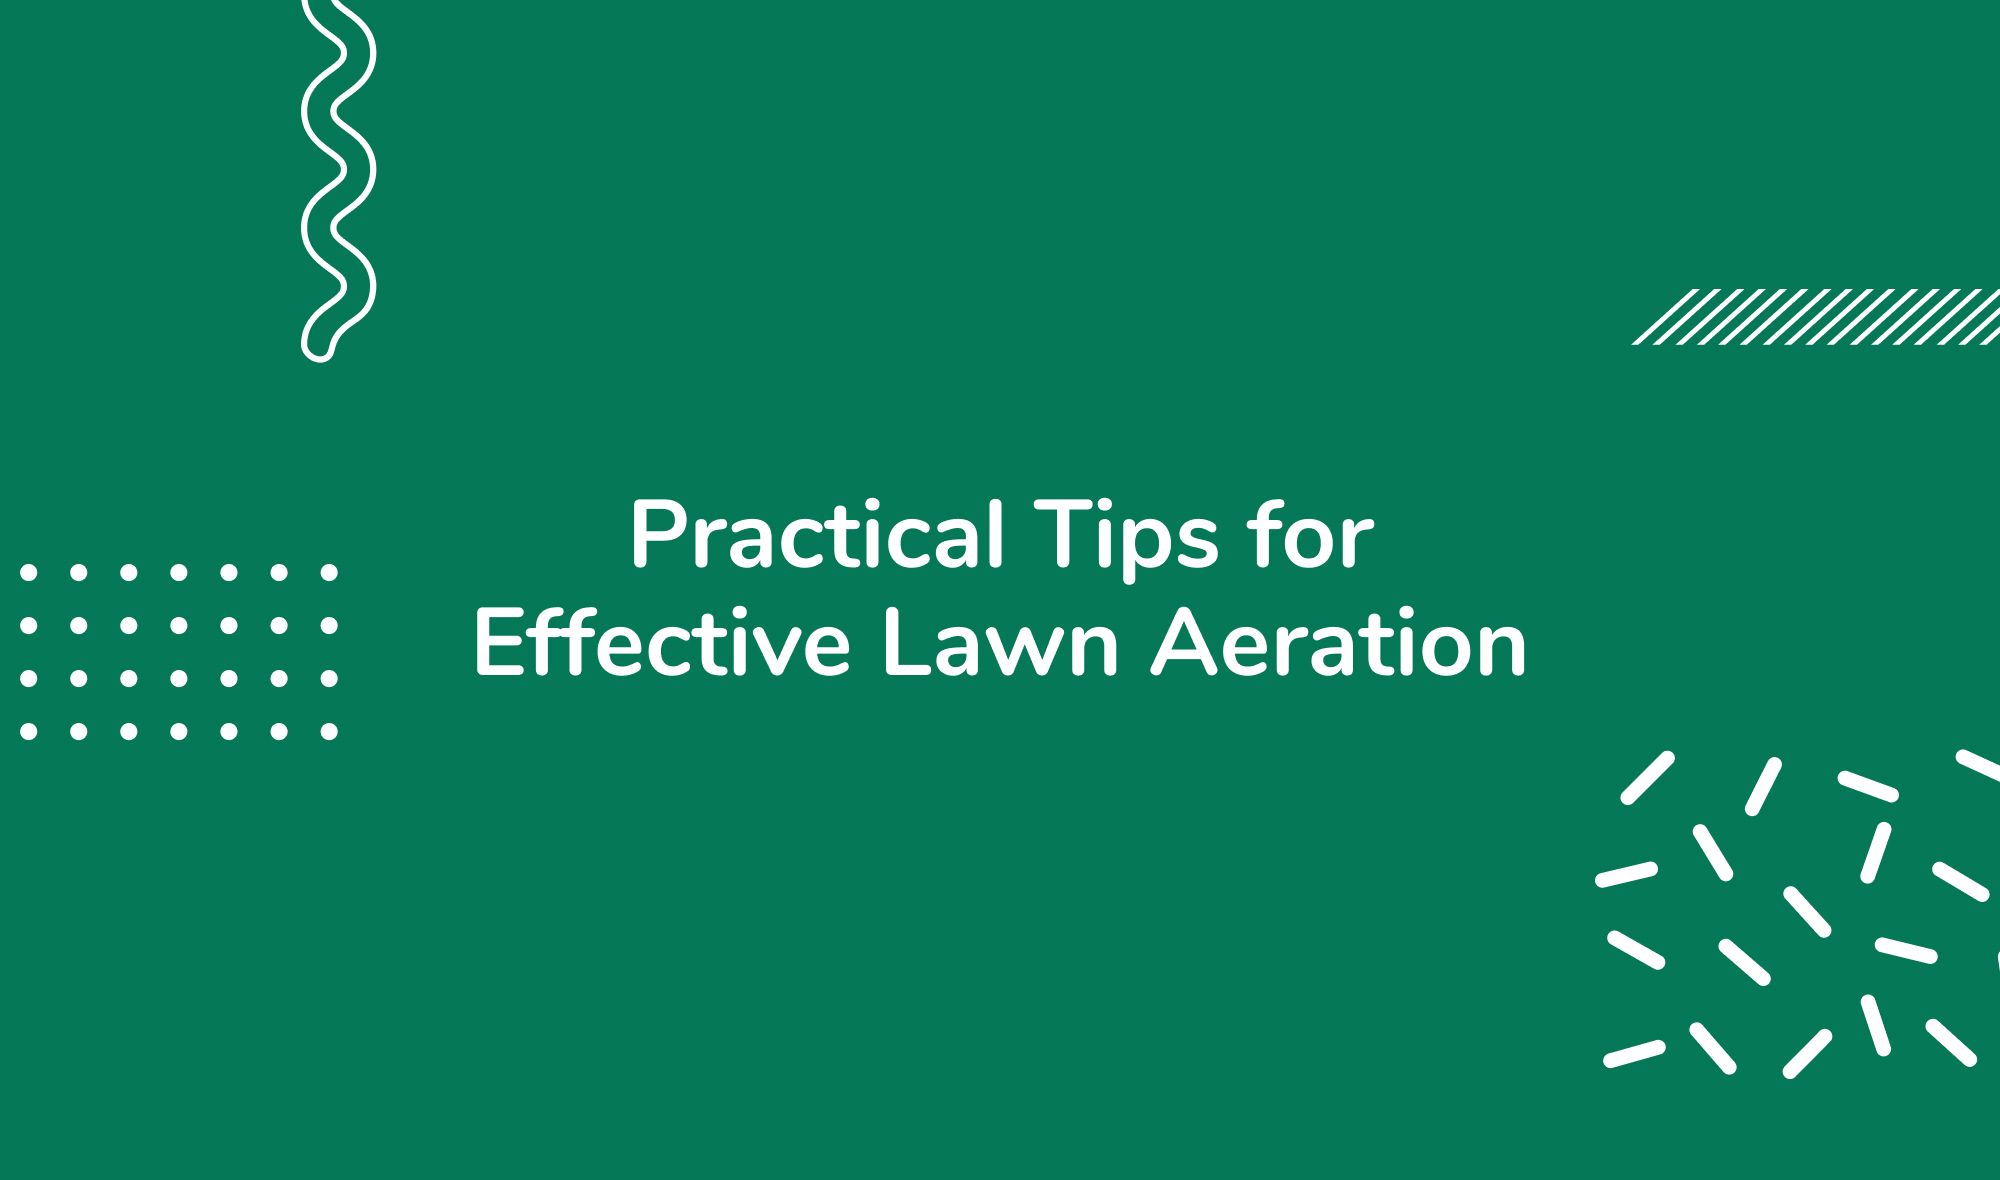 Practical Tips for Effective Lawn Aeration